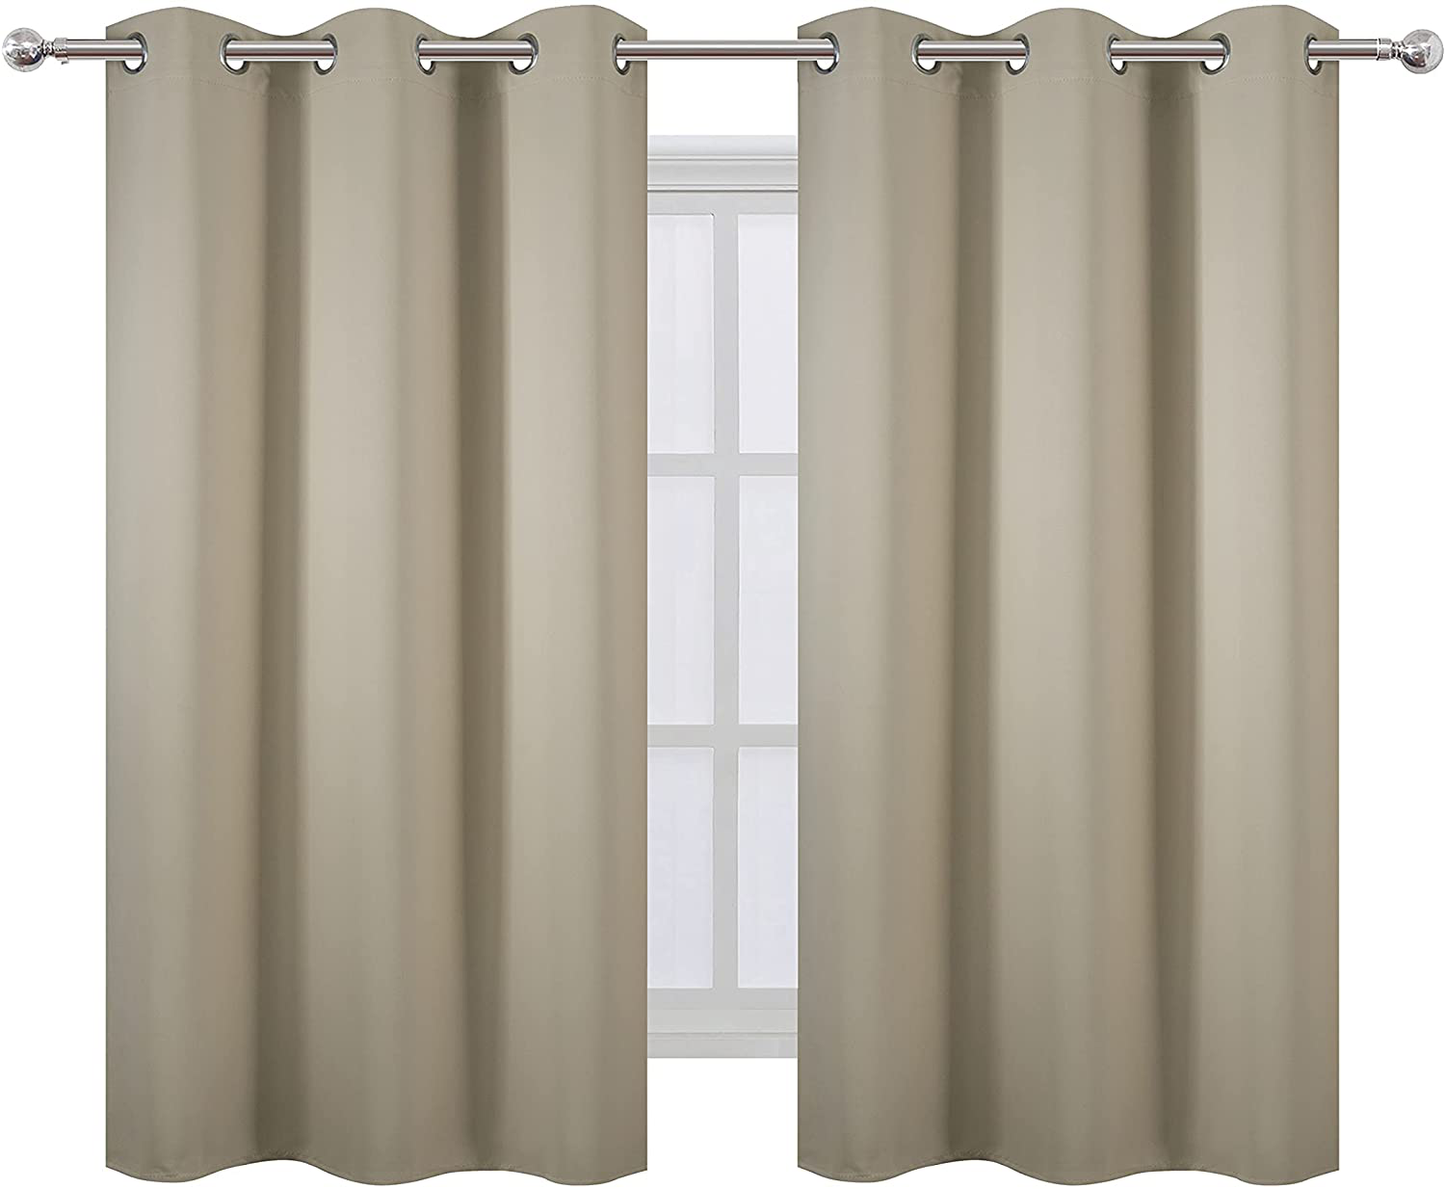 LEMOMO Teal Blackout Curtains/52 x 108 Inch/Set of 2 Panels Room Darkening Thermal Insulated Curtains for Bedroom